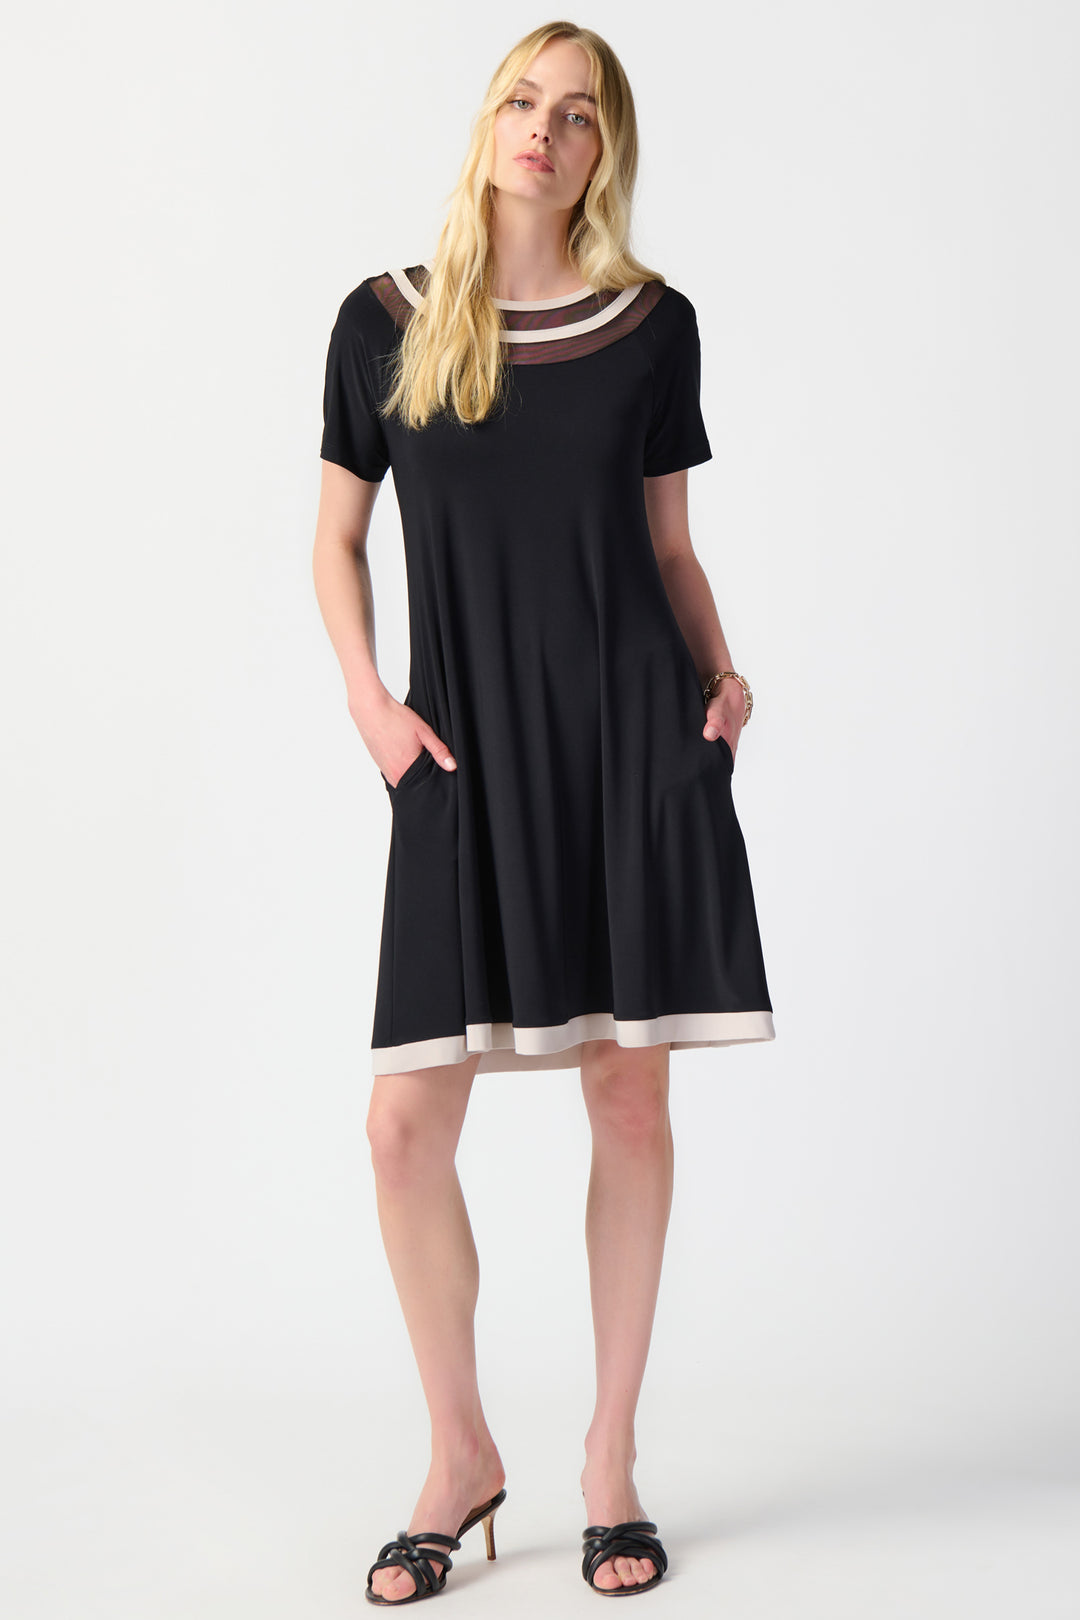 This dress is designed with a casual flow and showcases stylish contrast border hem and neckline. 